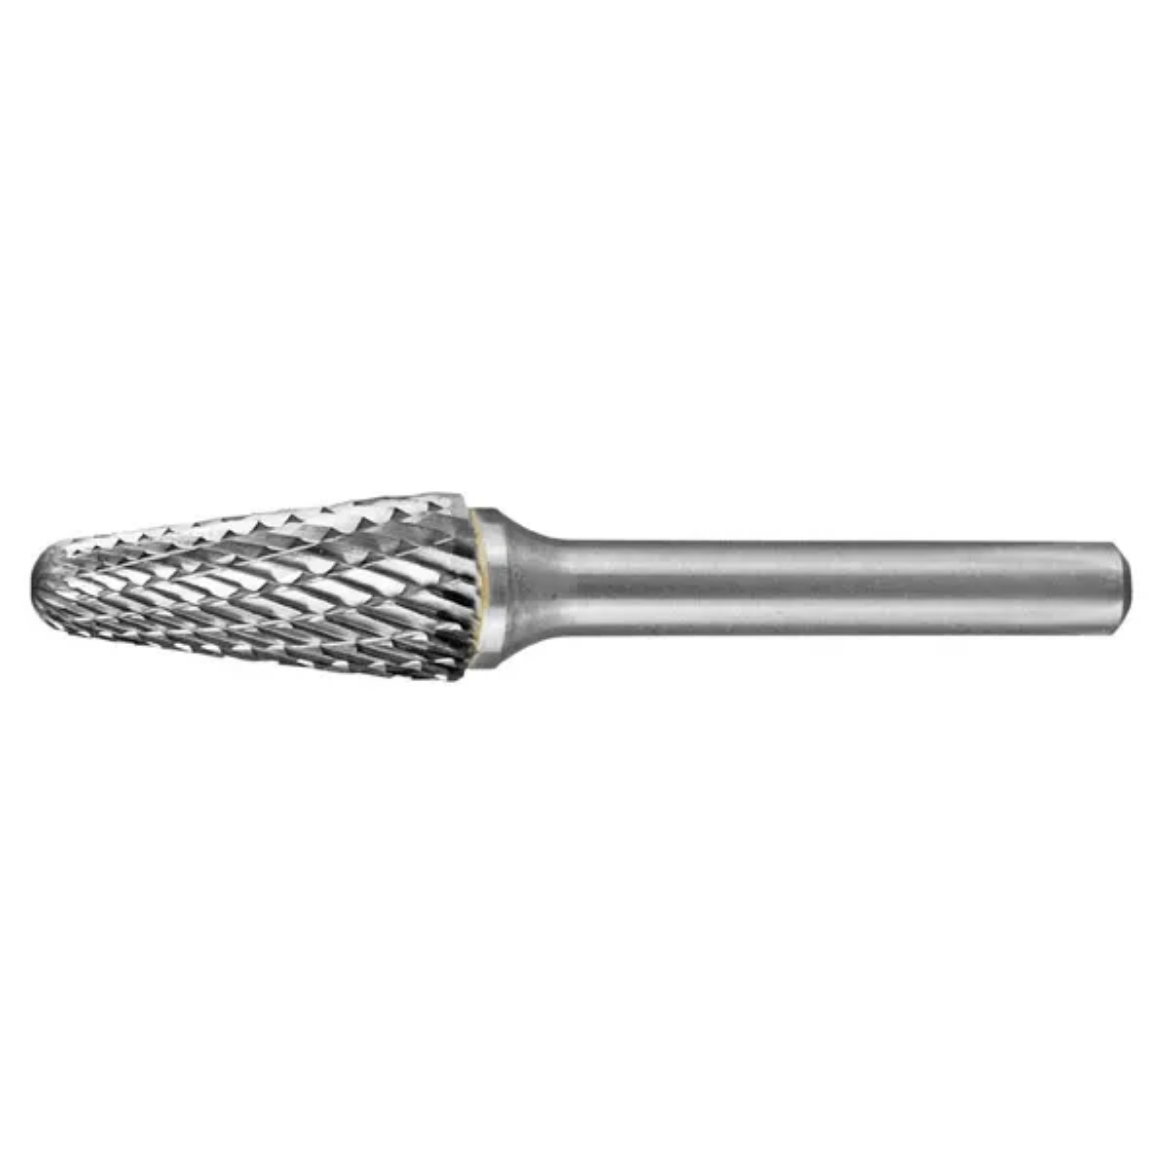 Picture of HOLEMAKER CARBIDE BURR, TAPERED RADIUS END, 5/16" X 7/8" HEAD, 1/4" SHANK DC